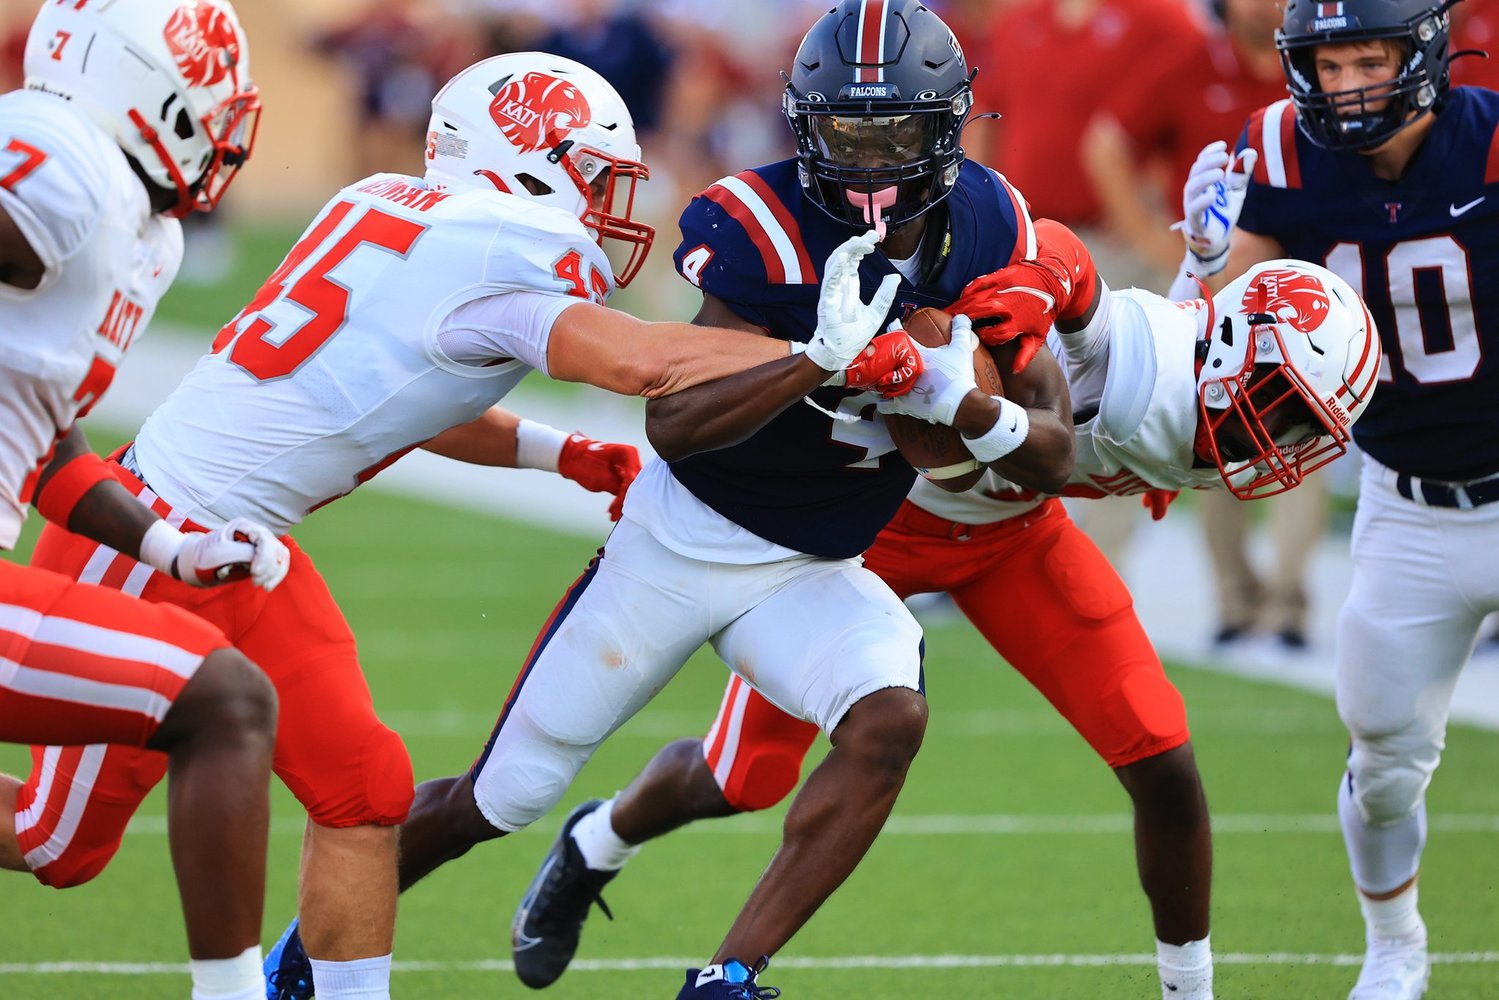 Tompkins Matthew Ogunrin fights for yardage during Saturday’s game between Katy and Tompkins at Legacy Stadium.